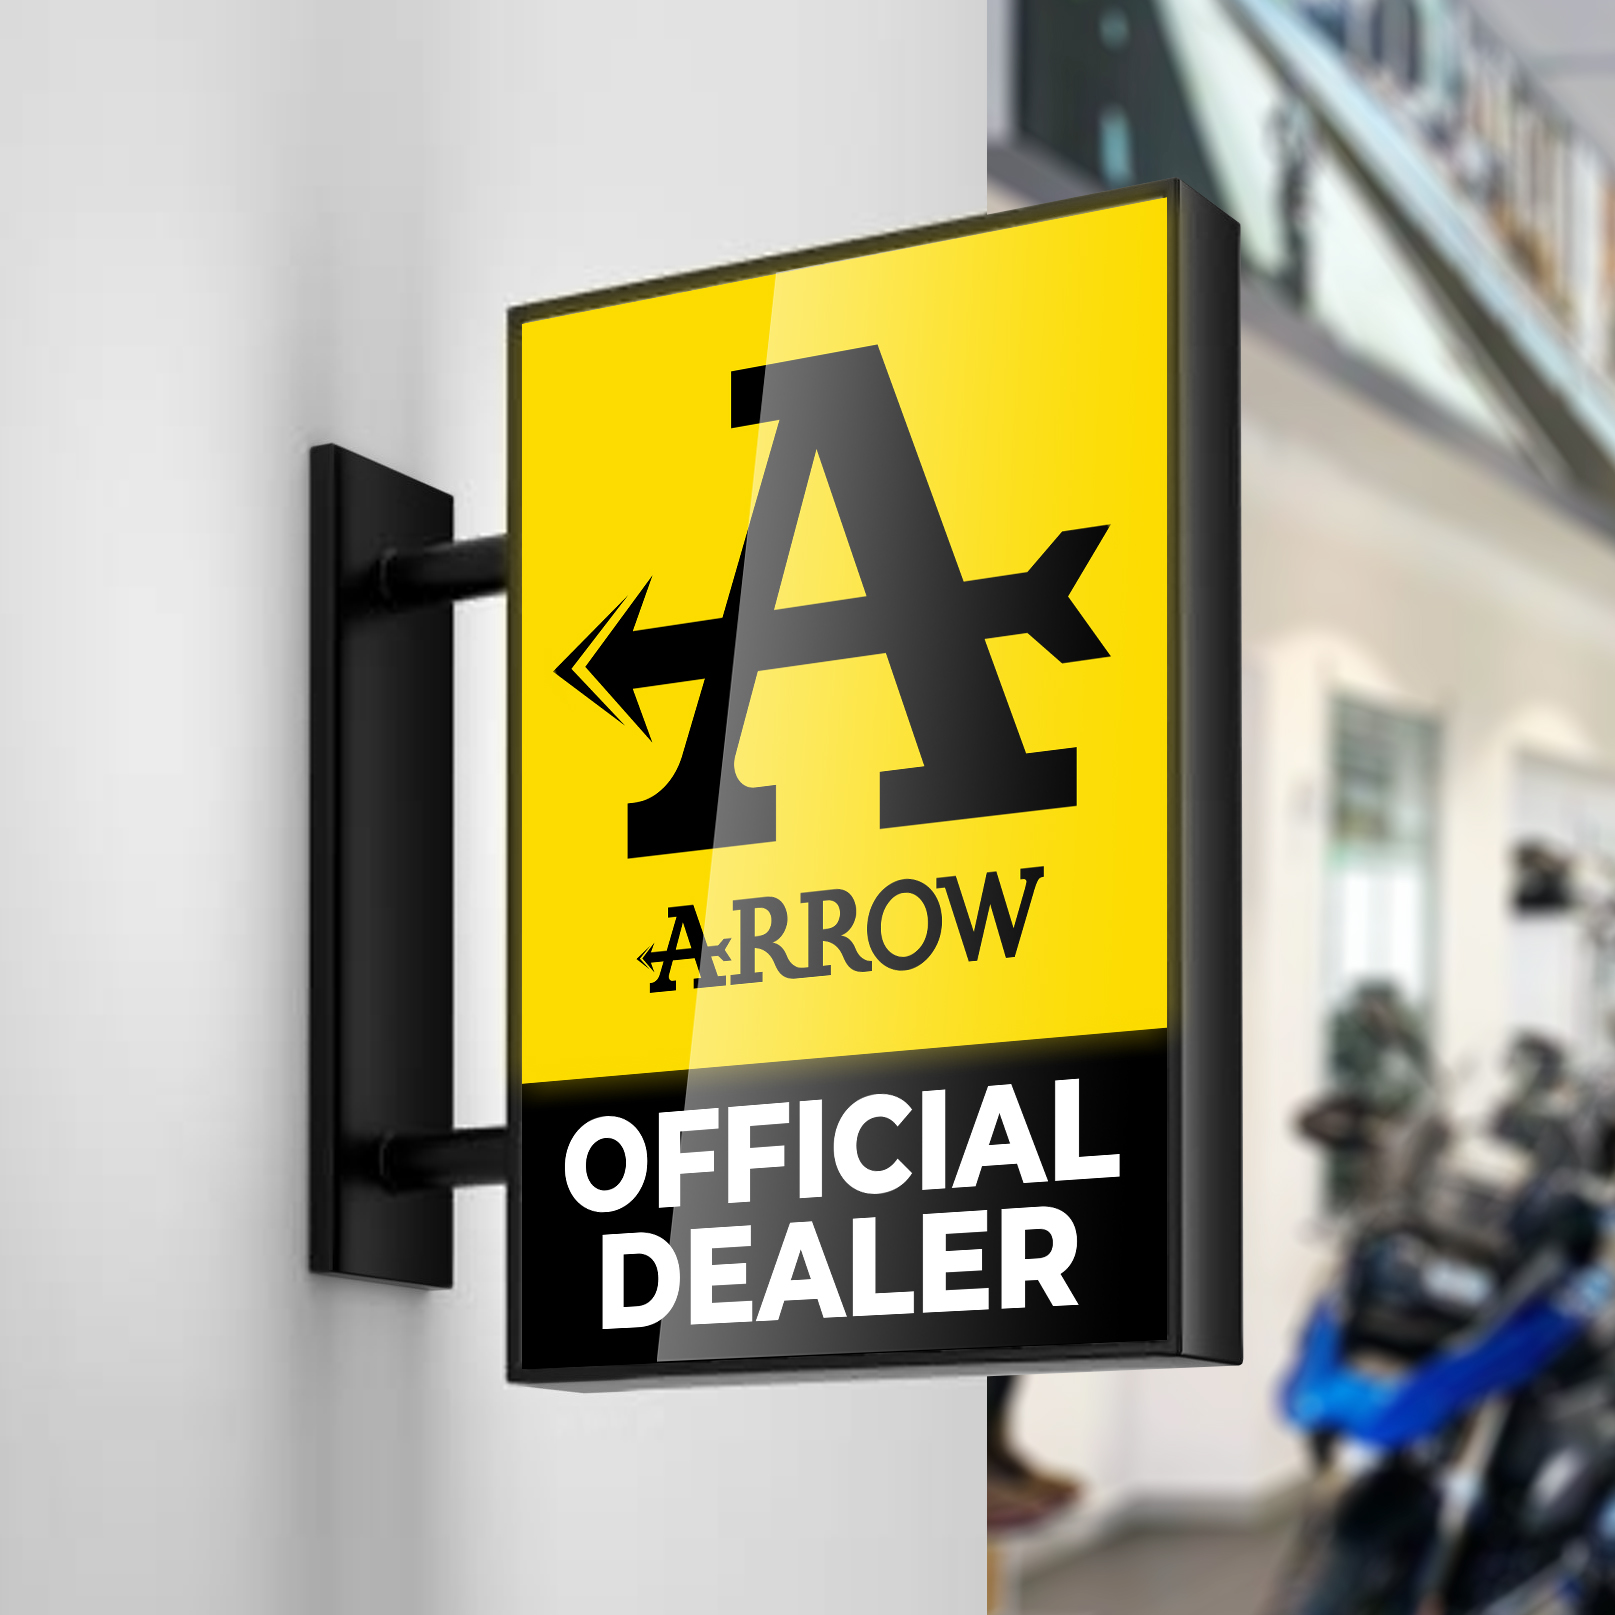 Arrow Repacking Kit For 2 Strokes And Scooter Silencer  19001un